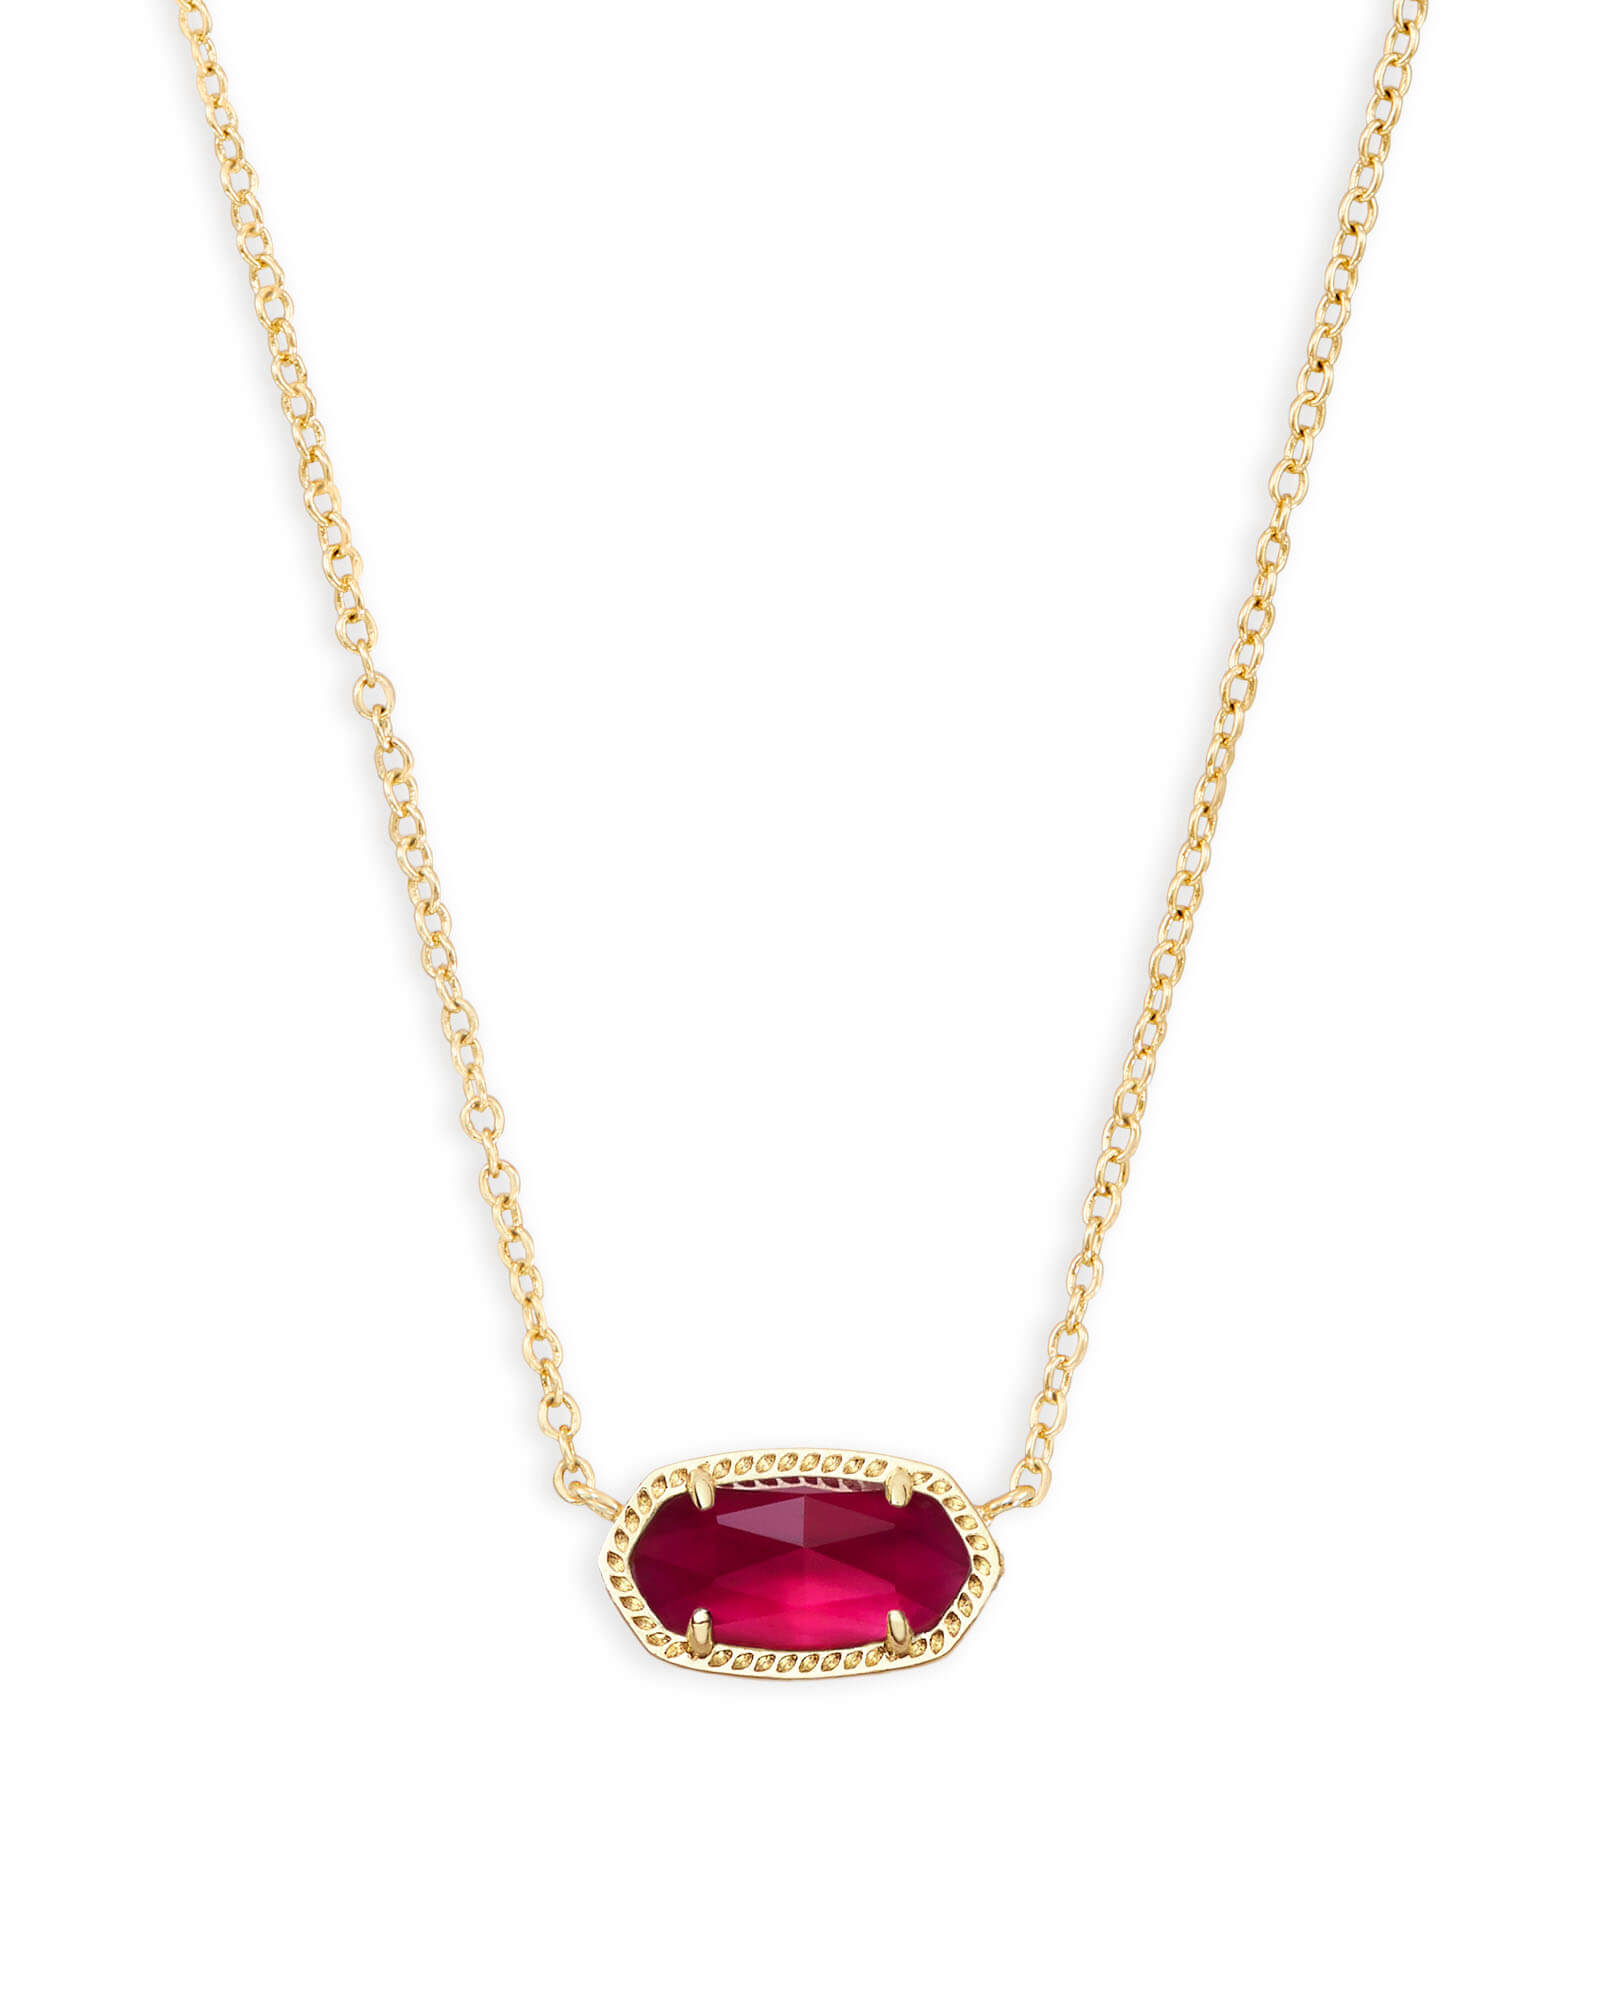 Elisa Gold Pendant Necklace in Red Berry | Kendra Scott